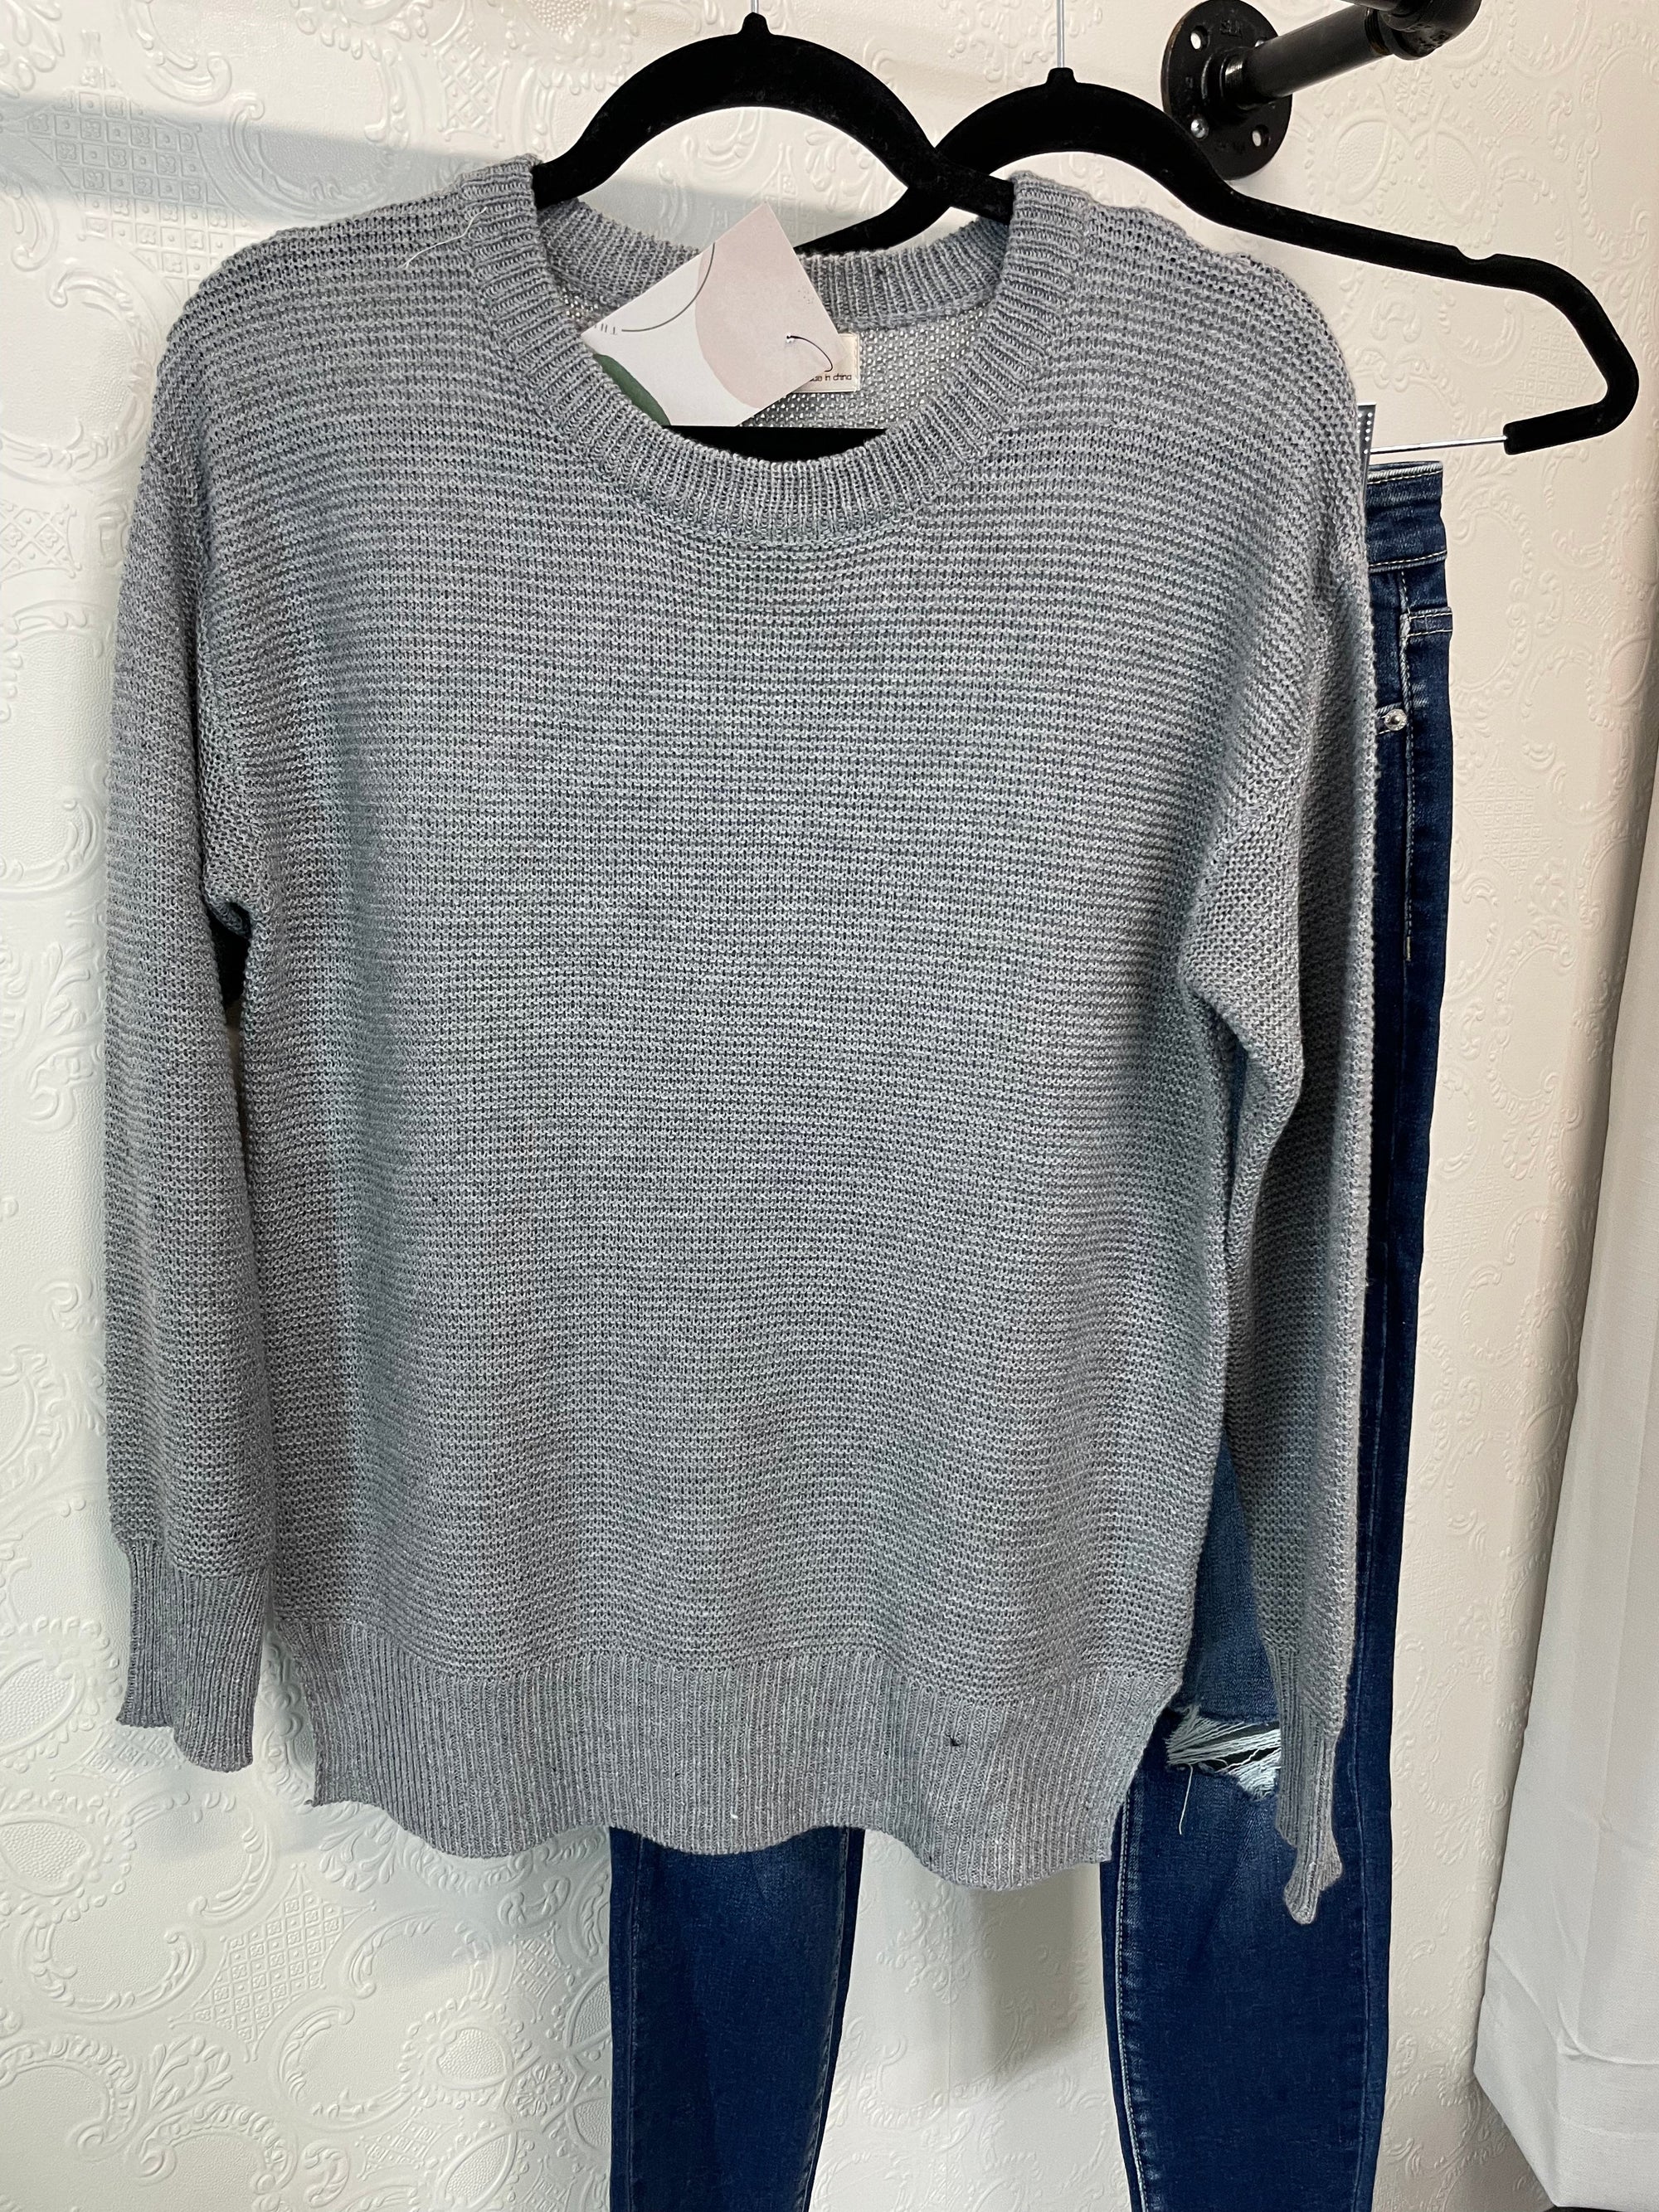 Heather Grey Oversized Sweater with Side Slits Long sleeve Be Cool 